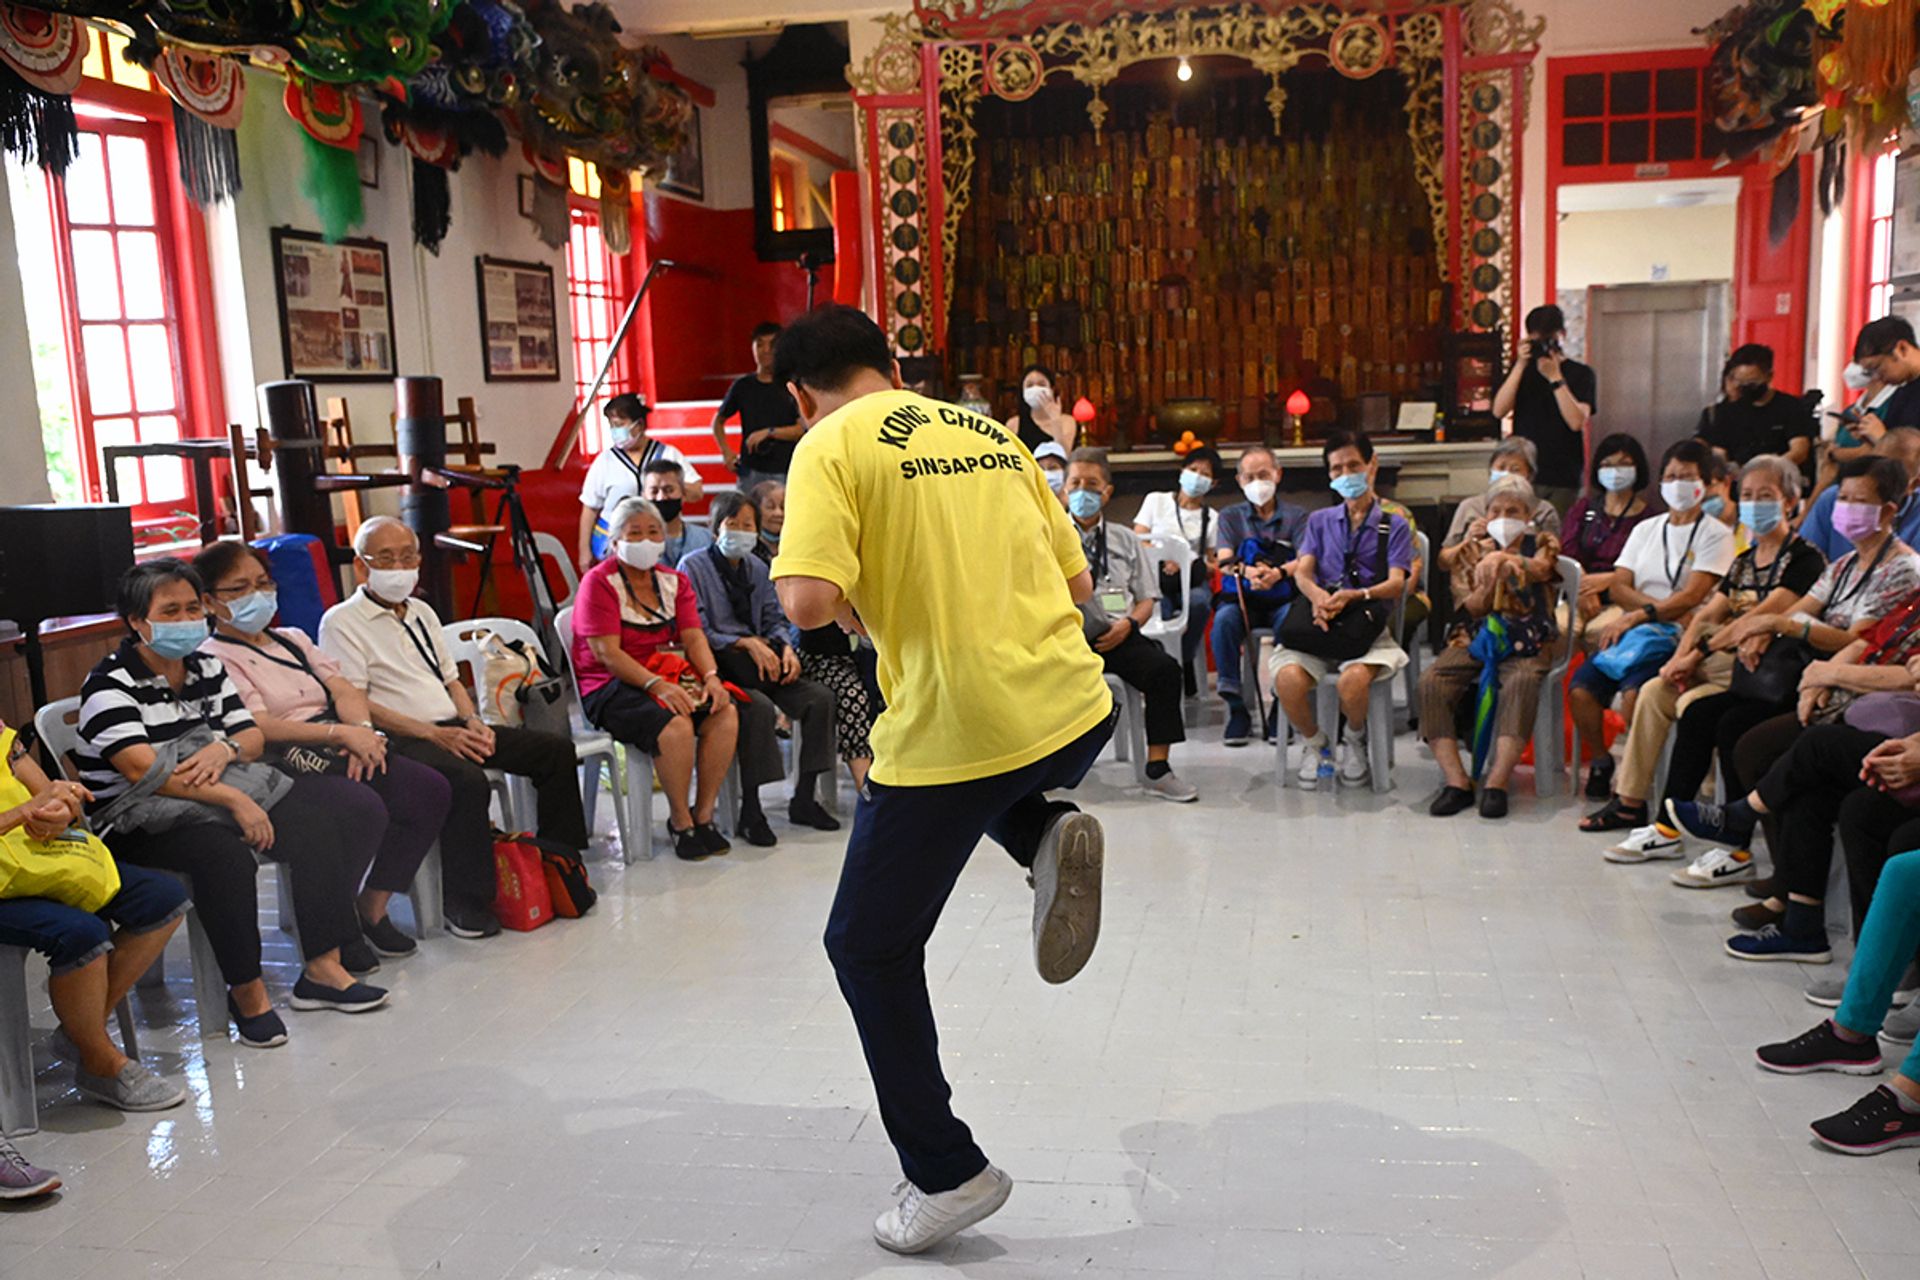 Kong Chow Wui Koon lion dance troupe instructor Leong Kwok Khuen, 56, explaining the horse stance in lion dance to the seniors.